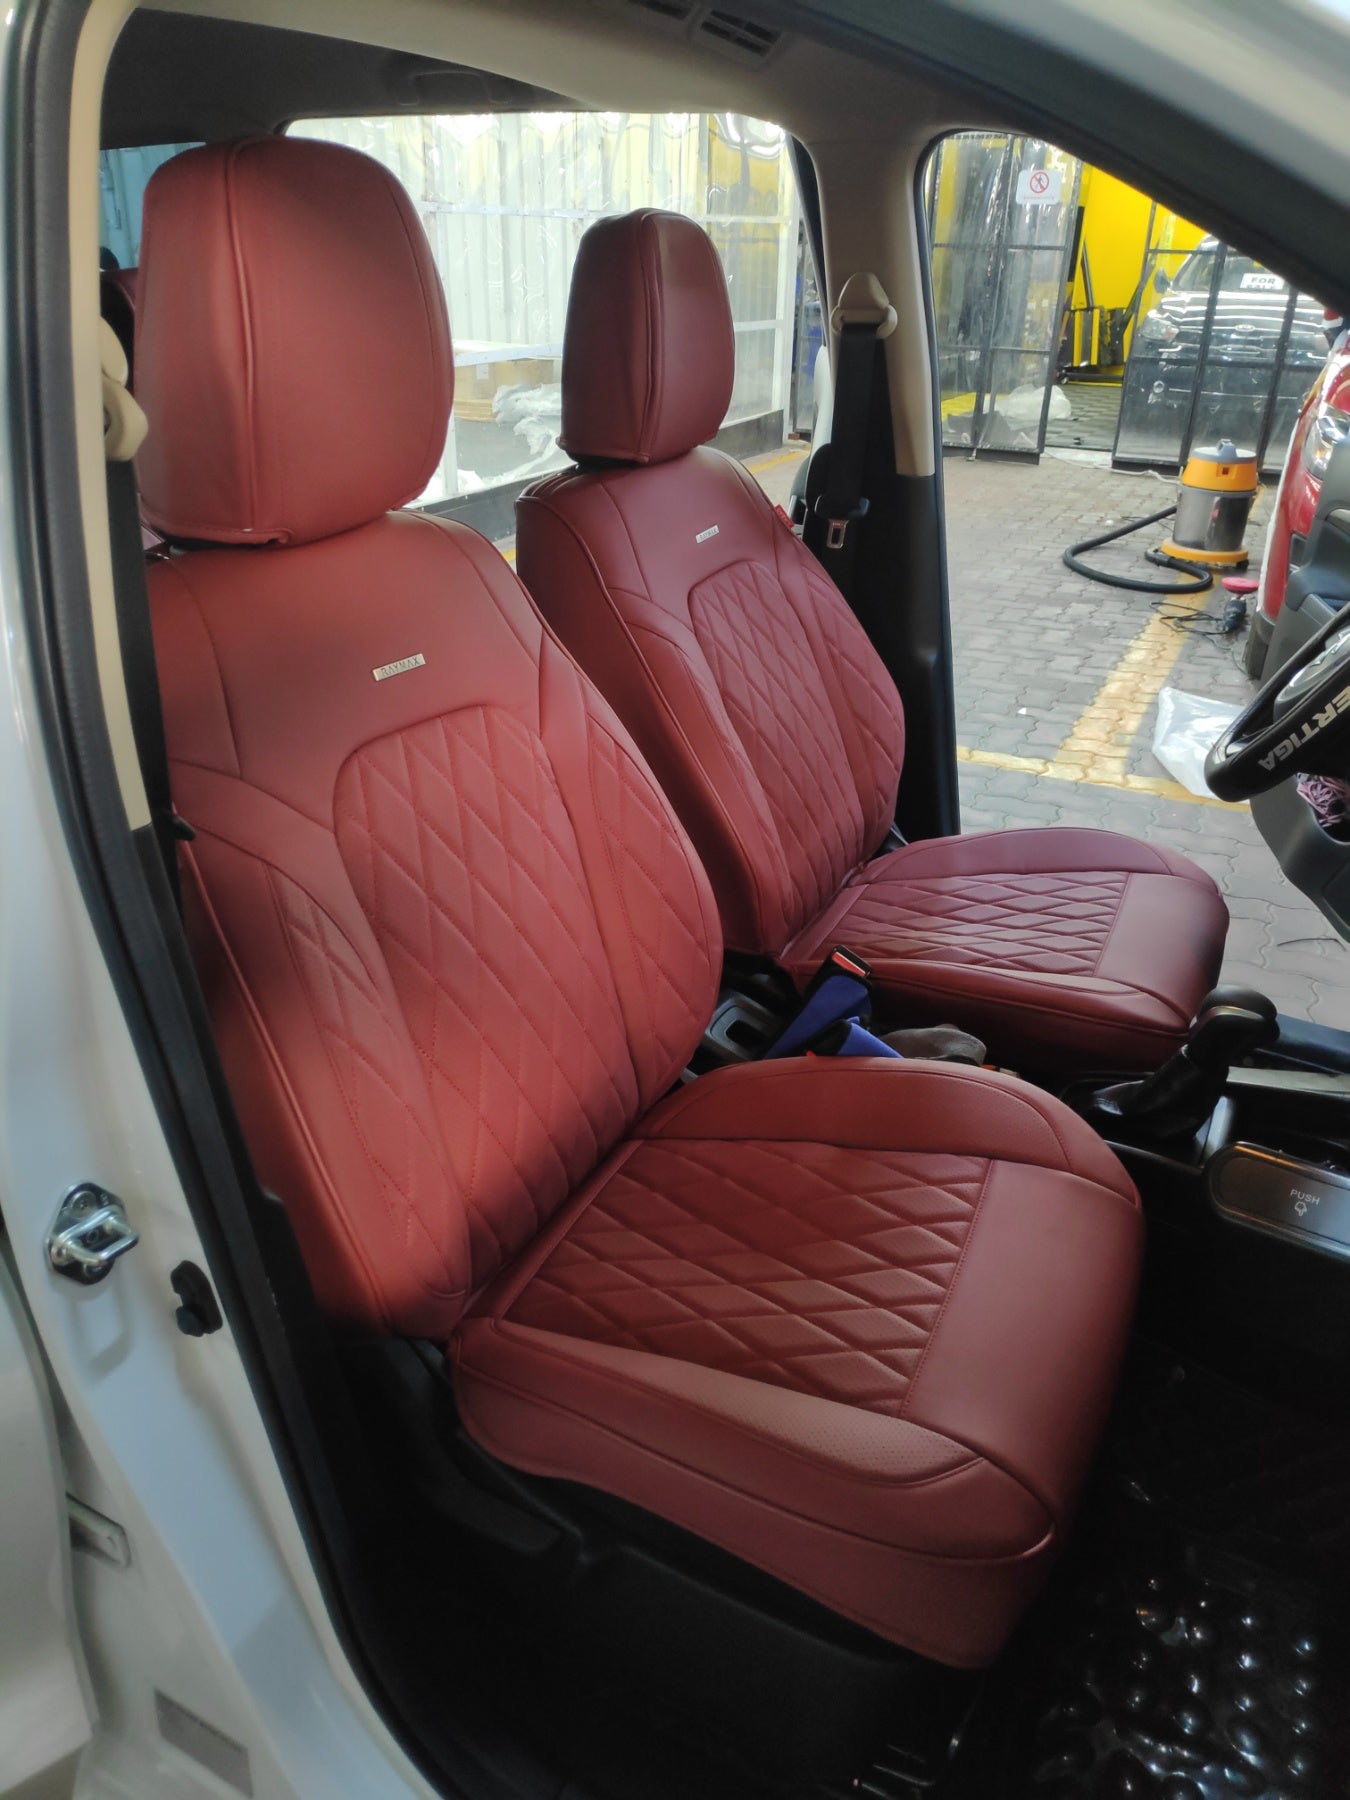 RAYMAX LUXURY SEAT COVER (H-23CX-08) (1) SET (WINE RED)